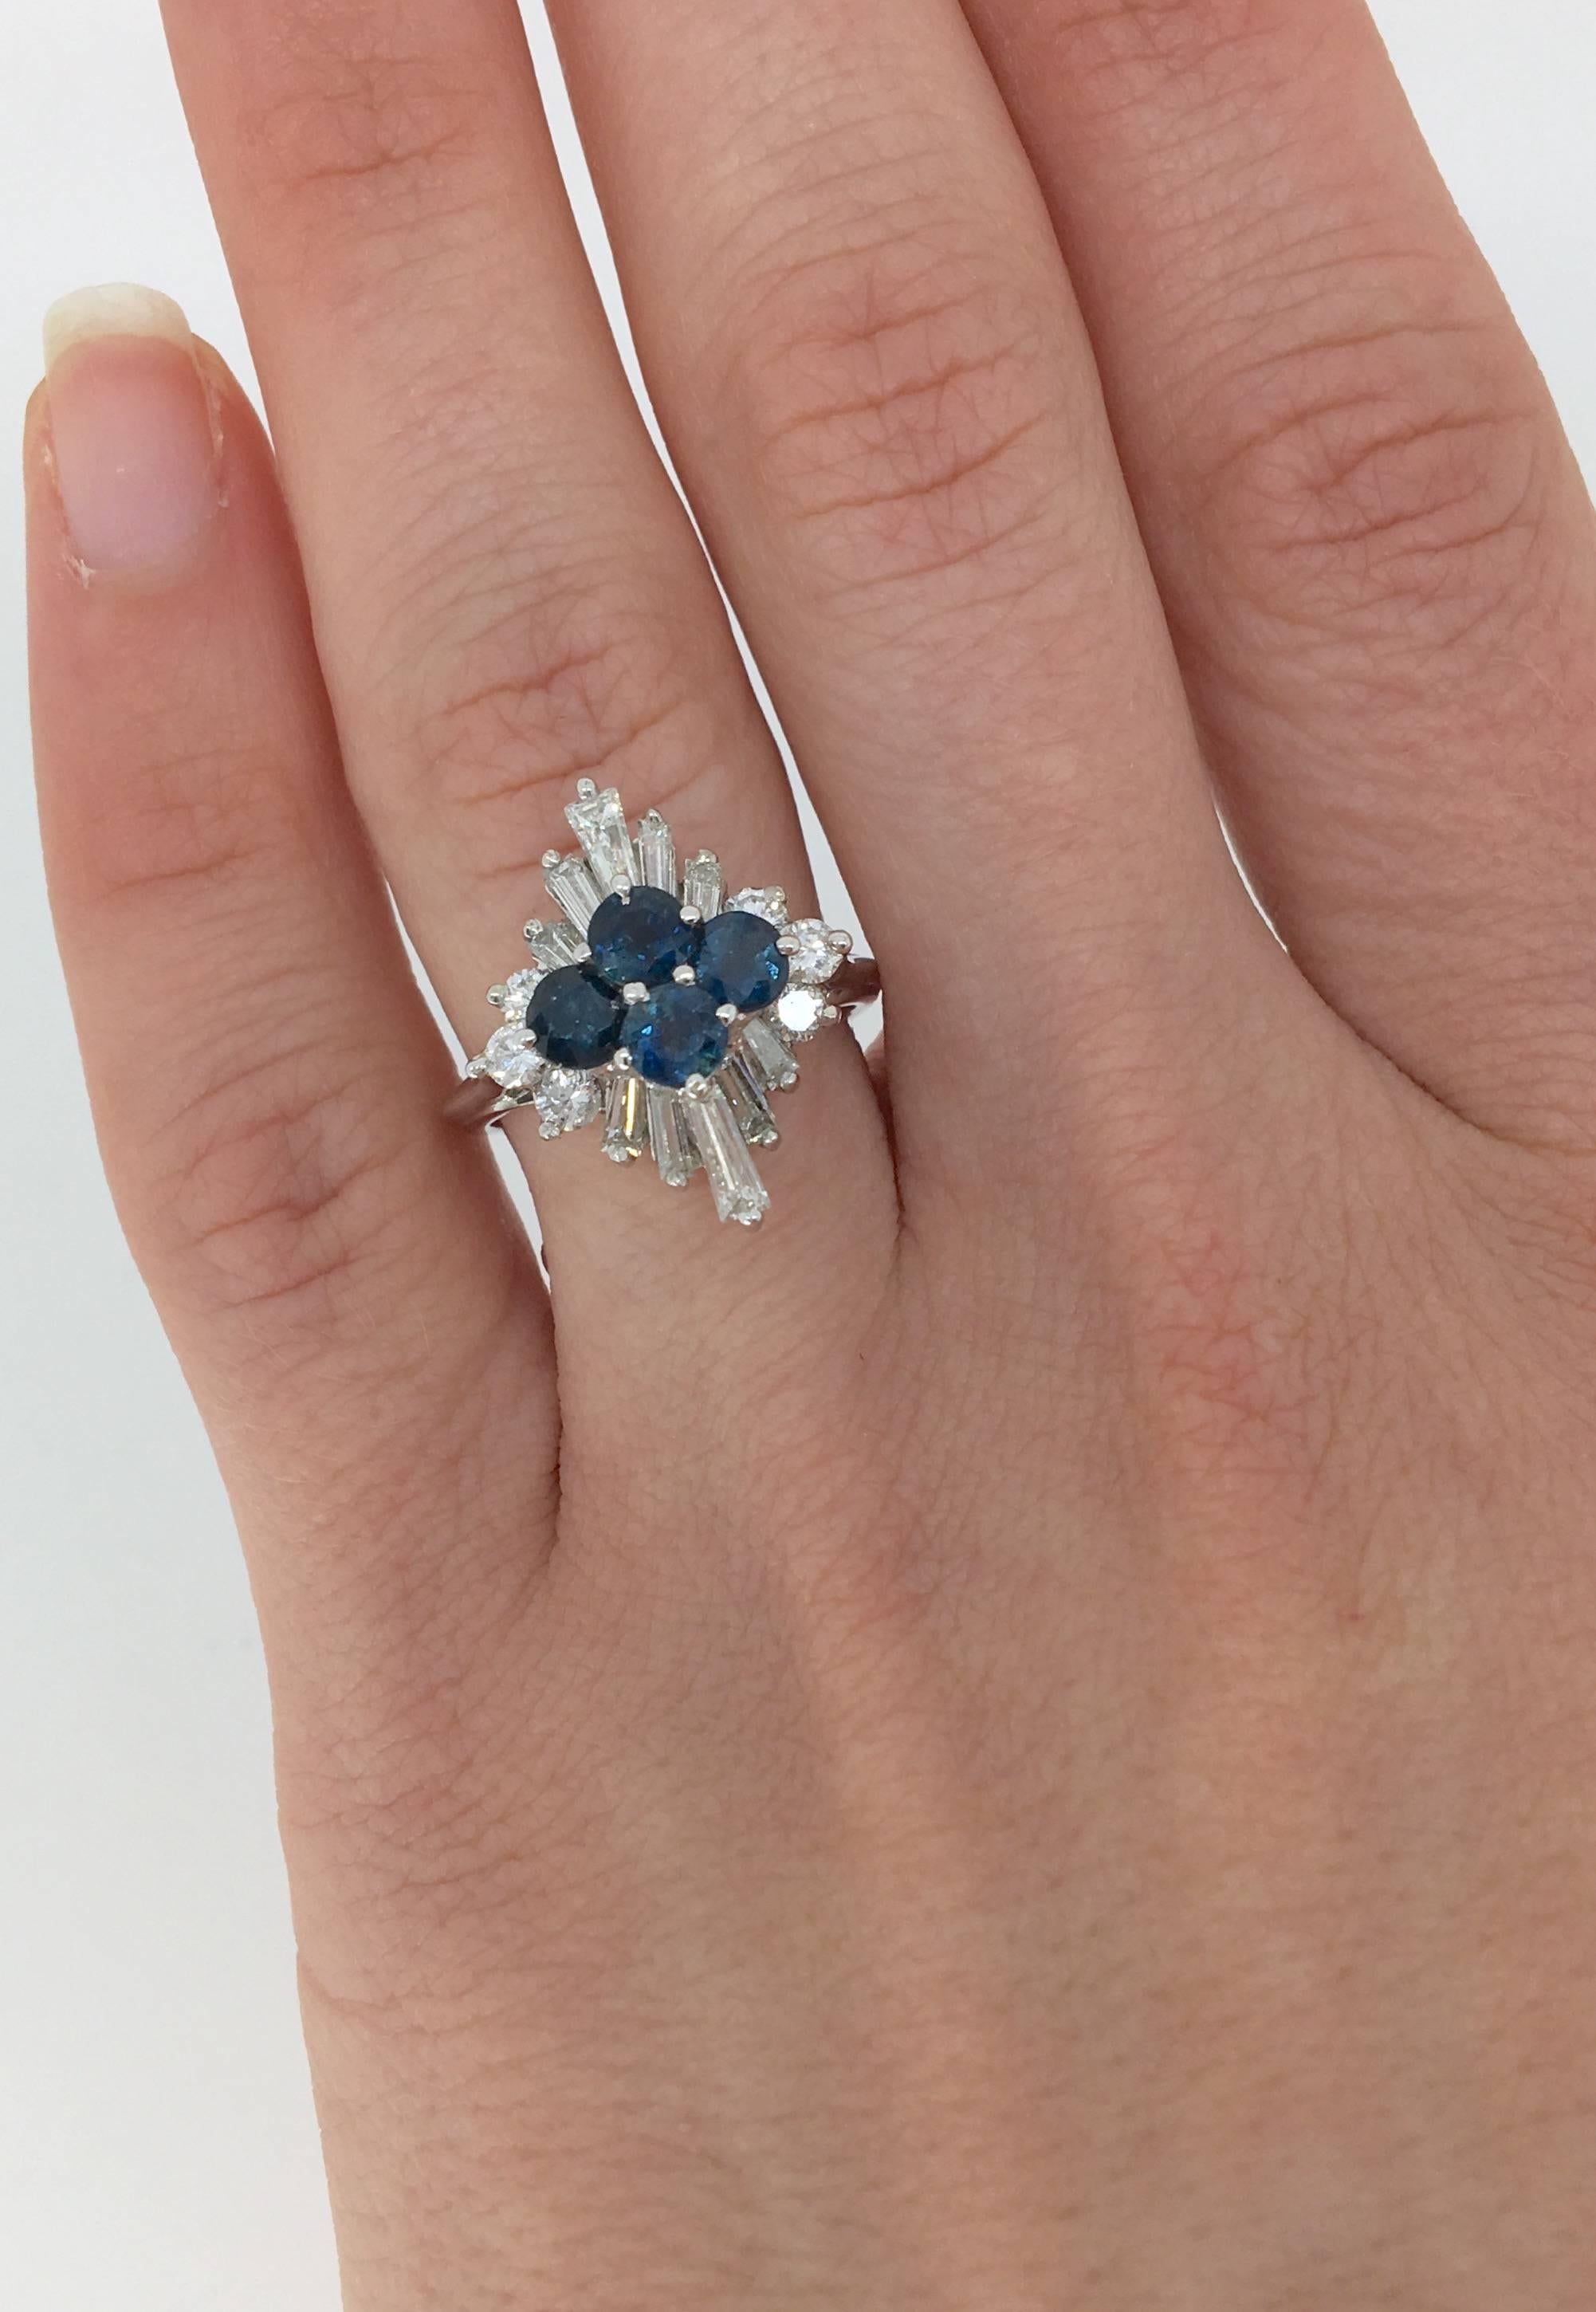 18k white gold diamond and sapphire ring featuring 10 (ten) Baguette cut diamonds, 6 (six) Round Brilliant cut diamonds surrounding 4 (four) Round blue sapphires. The total diamond weight is approximately 1.04ctw, and the 18k white gold ring is